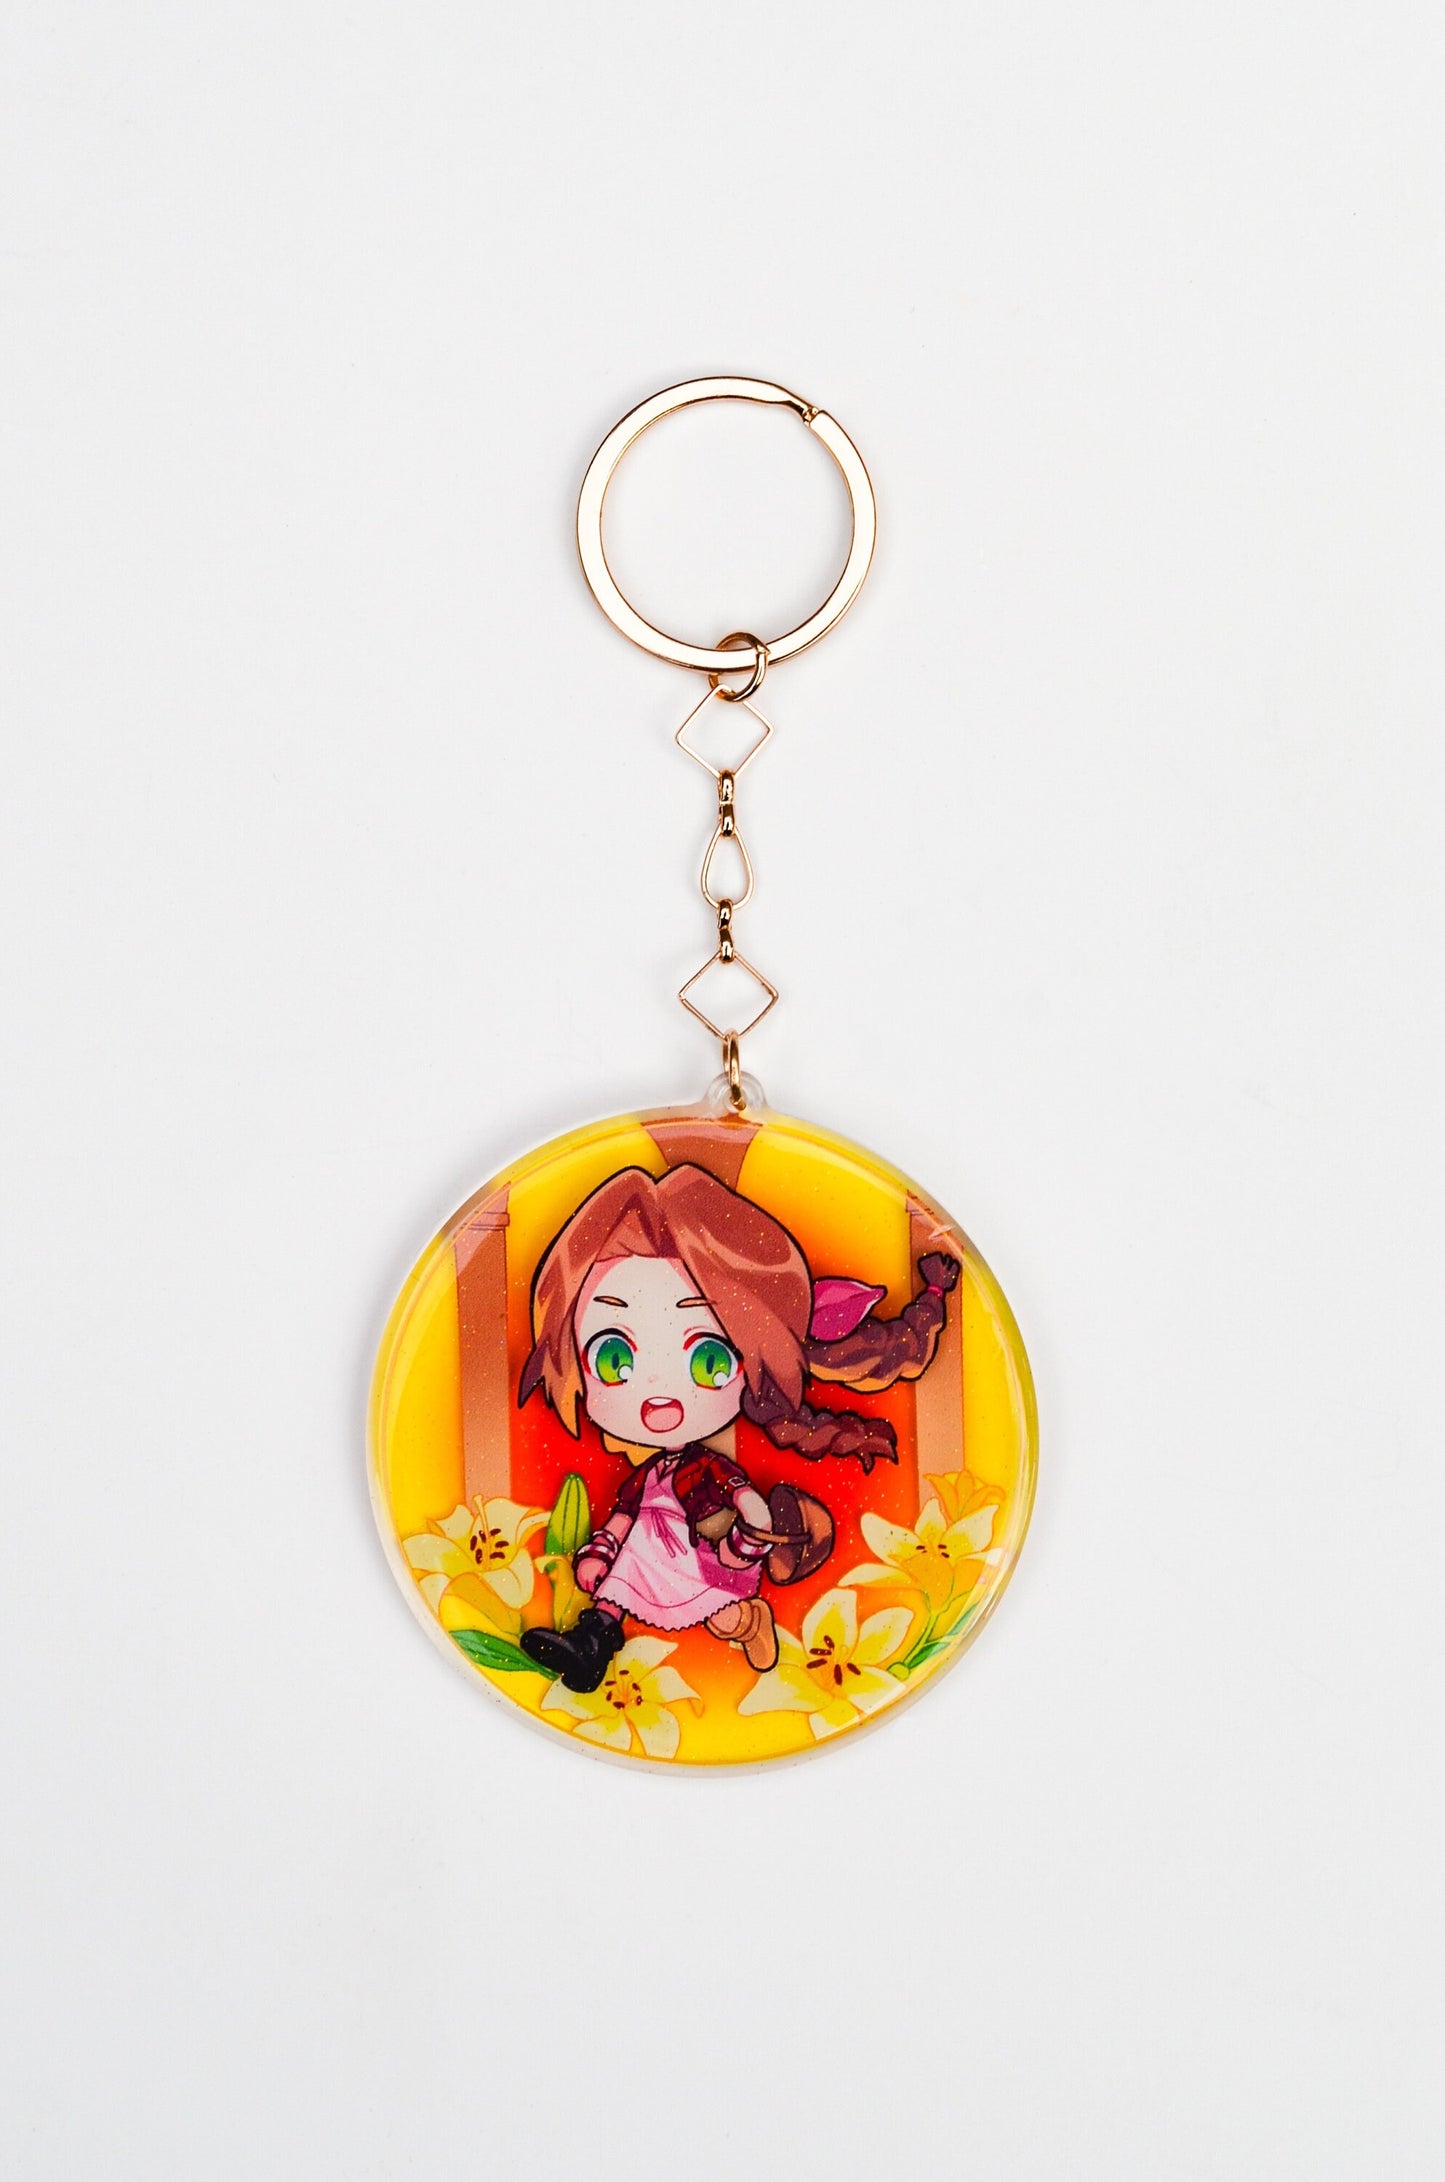 3" Materia Charms